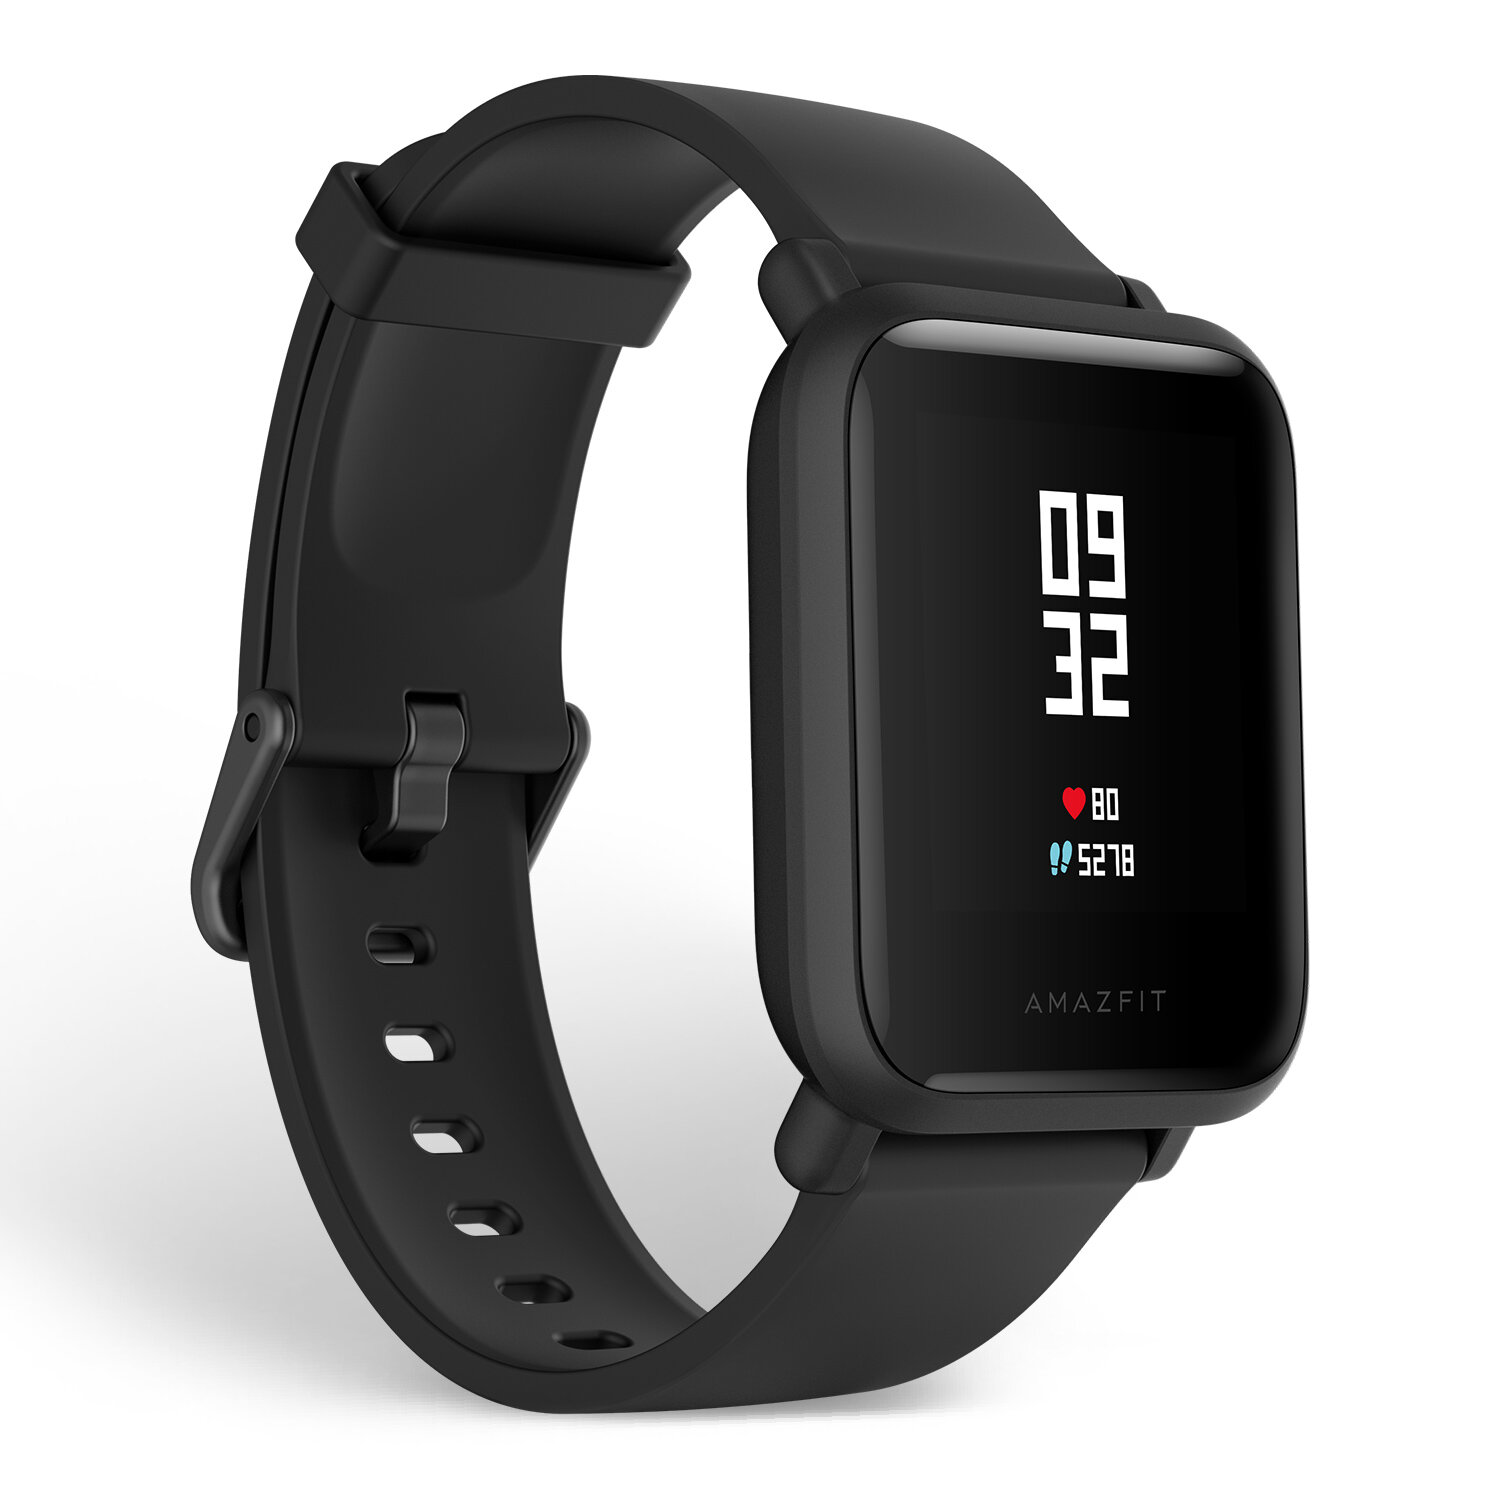 Original Amazfit Bip Lite Light Weight Outdoor Wristband PPG Heart Rate Monitor 45 Days Standby Smart Watch Global Version